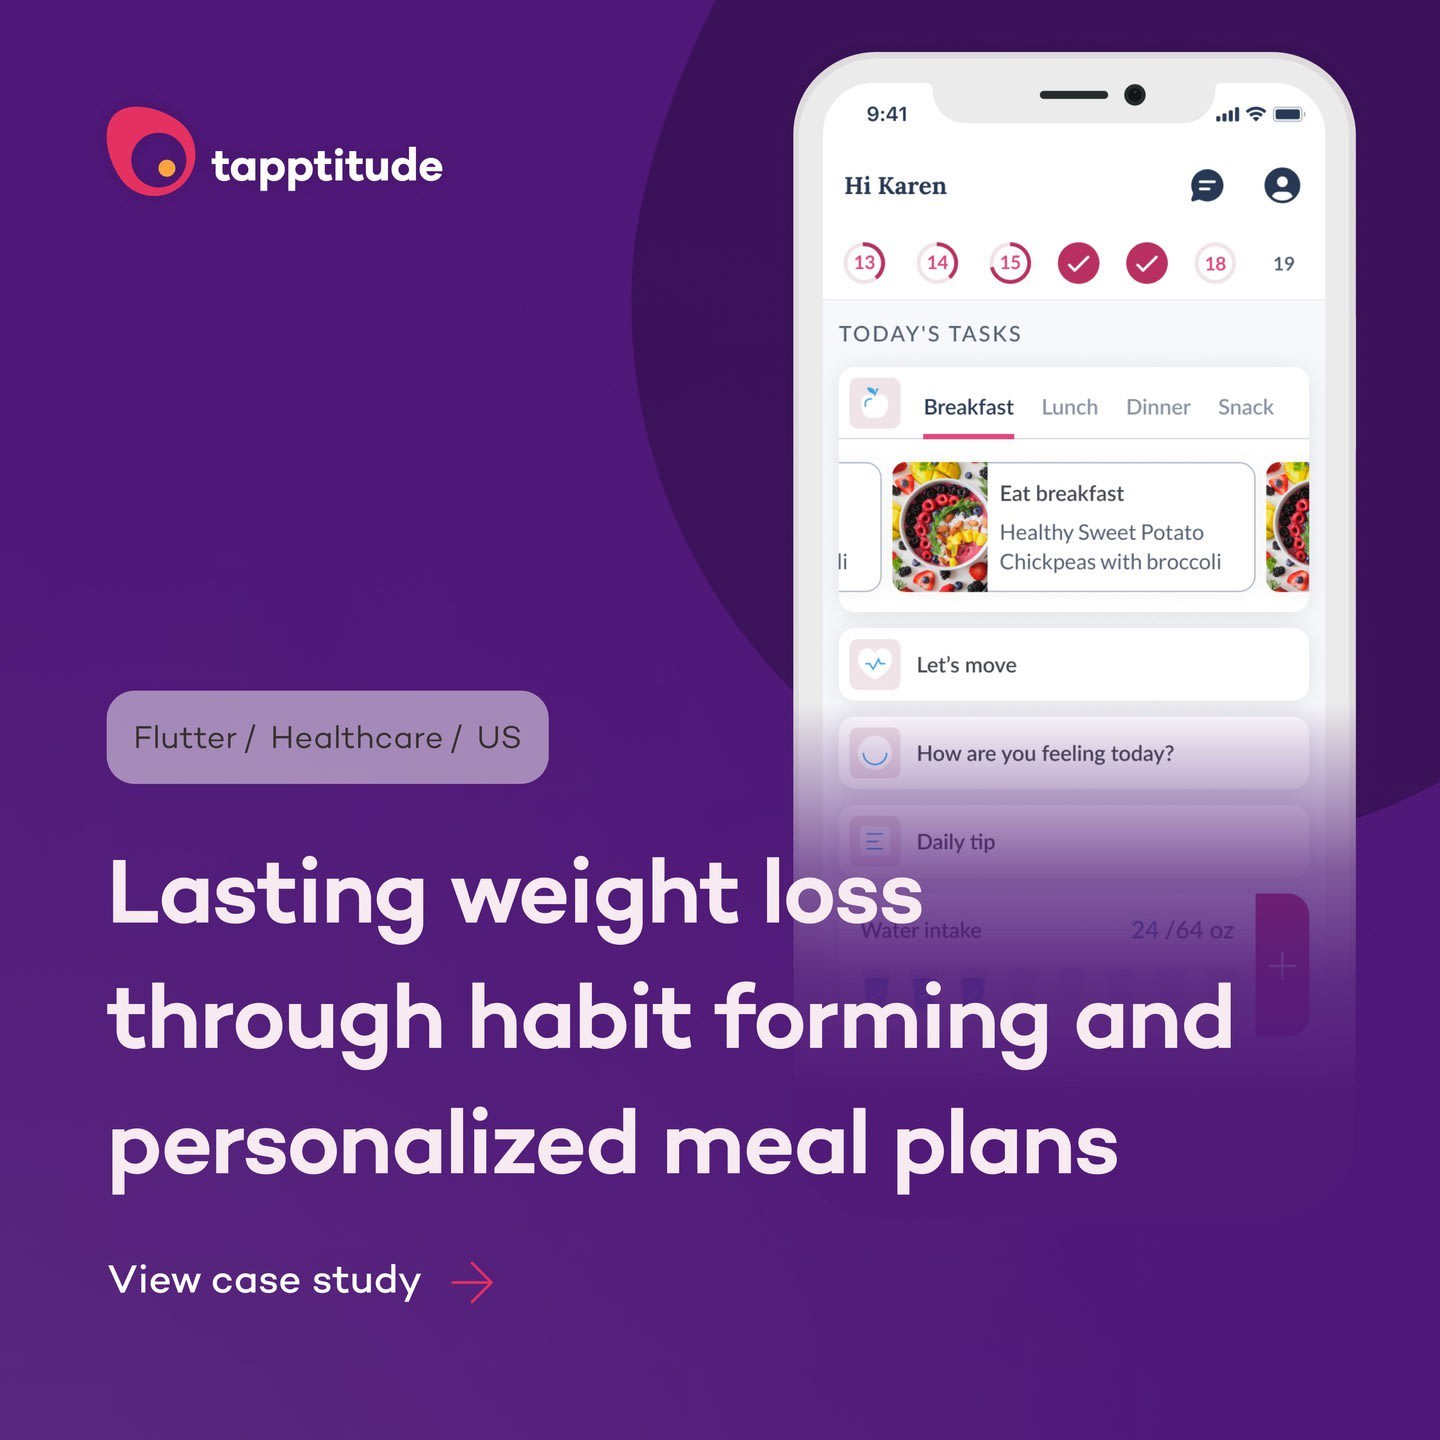 Introducing our latest case study post featuring Reverse Health - the mobile app revolutionizing weight loss during menopause.

With over 12k paid subscriptions, 10k+ daily active users, and a whopping 15k+ monthly active users, the impact speaks volumes! 💪 

The app integrates gamification to make fitness enjoyable, offers bite-sized information for quick updates, and provides personalized meal plans tailored to users' needs.🥗 Check out the full case study: https://tapptitude.com/case-studies/reverse-health

Ready to embark on your next app development journey with confidence? Start your project with us today and see your ideas come to life.

#tapptiude #tappsquad #reversehealth #menopauseweightloss #healthcare #flutter #appdevelopment #US